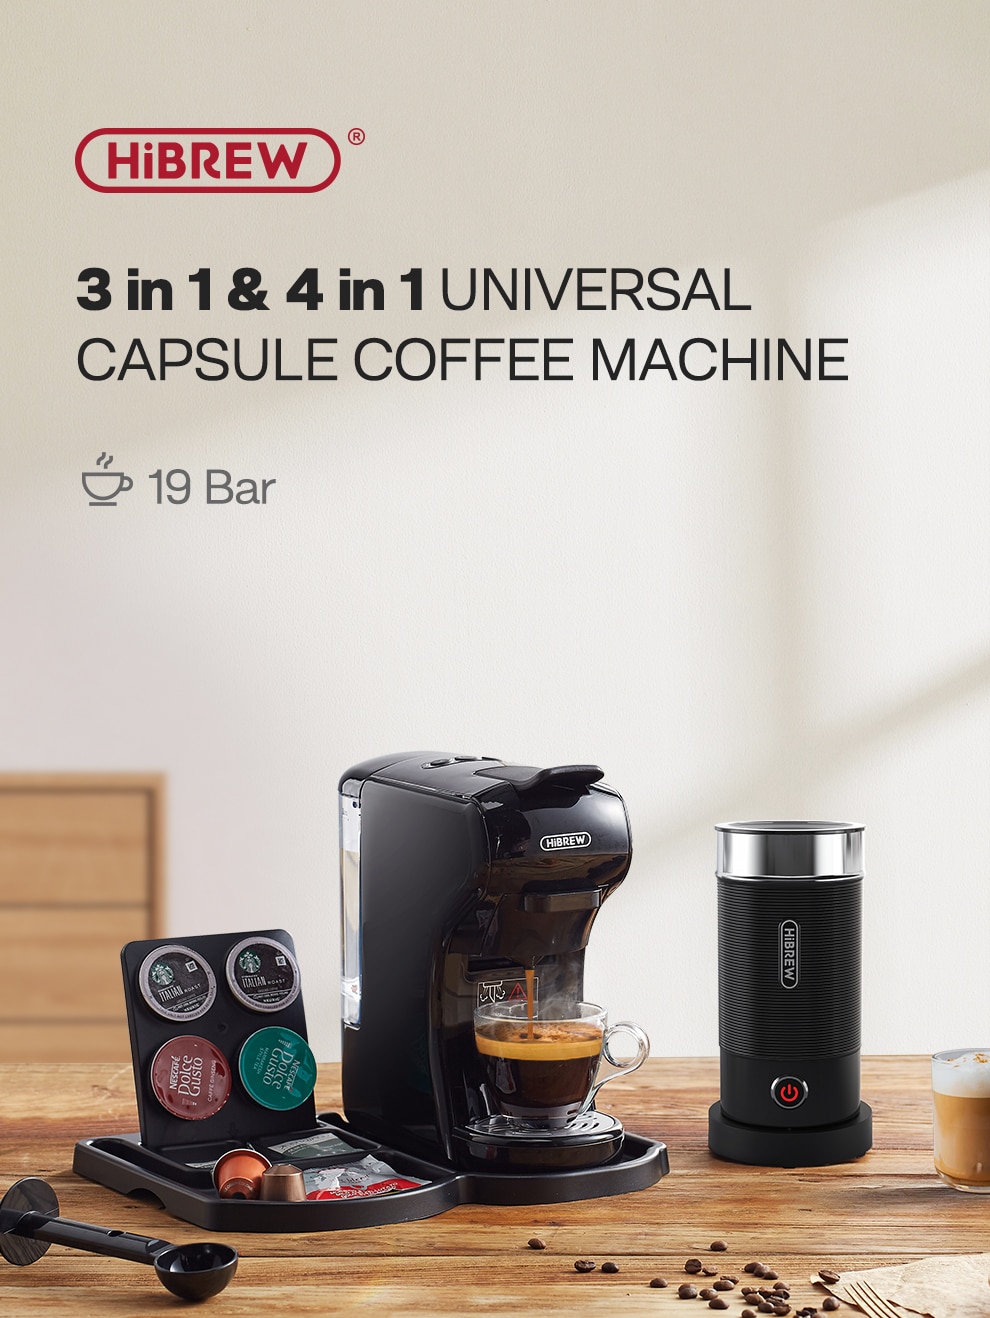 HiBREW 4 in 1 Multiple Capsule Coffee Maker Full Automatic With Hot & Cold Milk Foaming Machine Frother & Plastic Tray Set